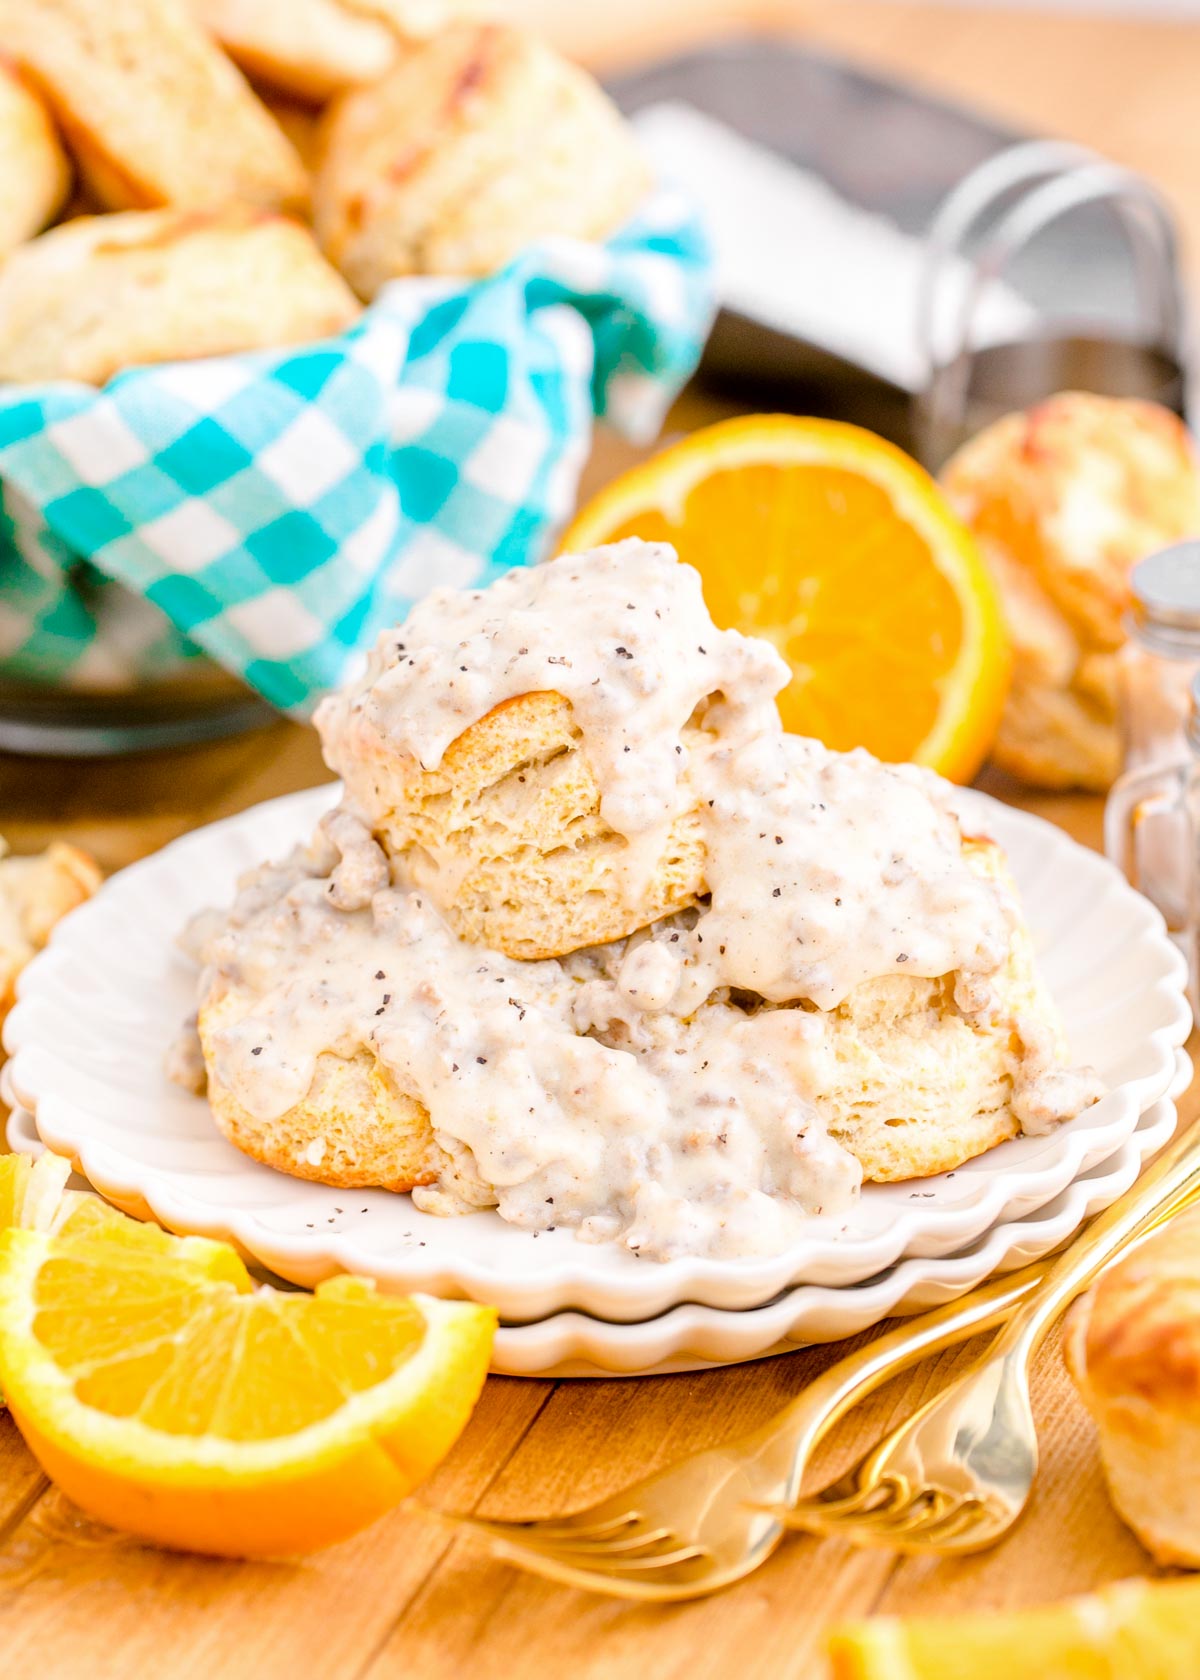 Biscuits and sausage gravy on a white plate on a wooden table.